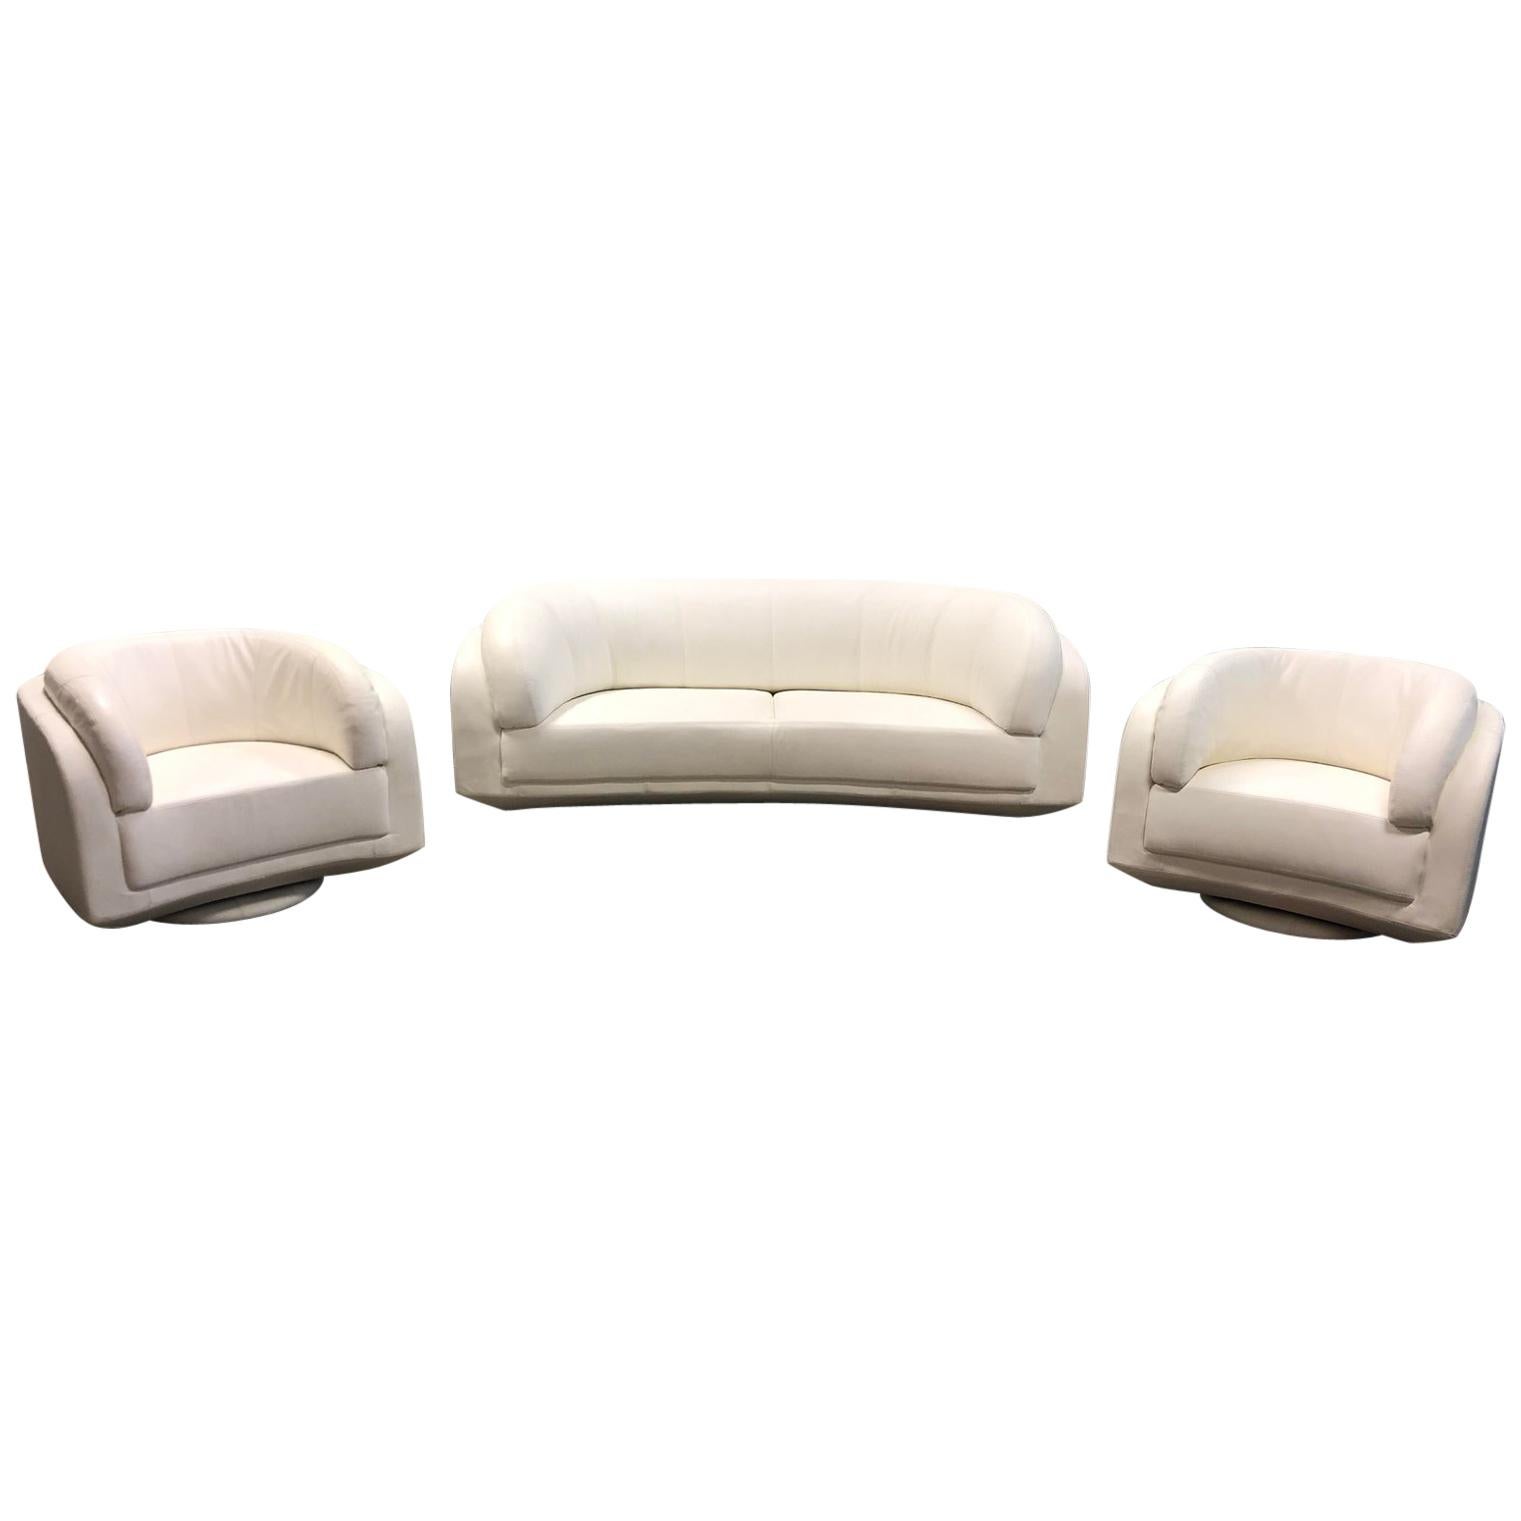 W.Schillig Arabesque Sofa and Pair of Swivel Chairs For Sale